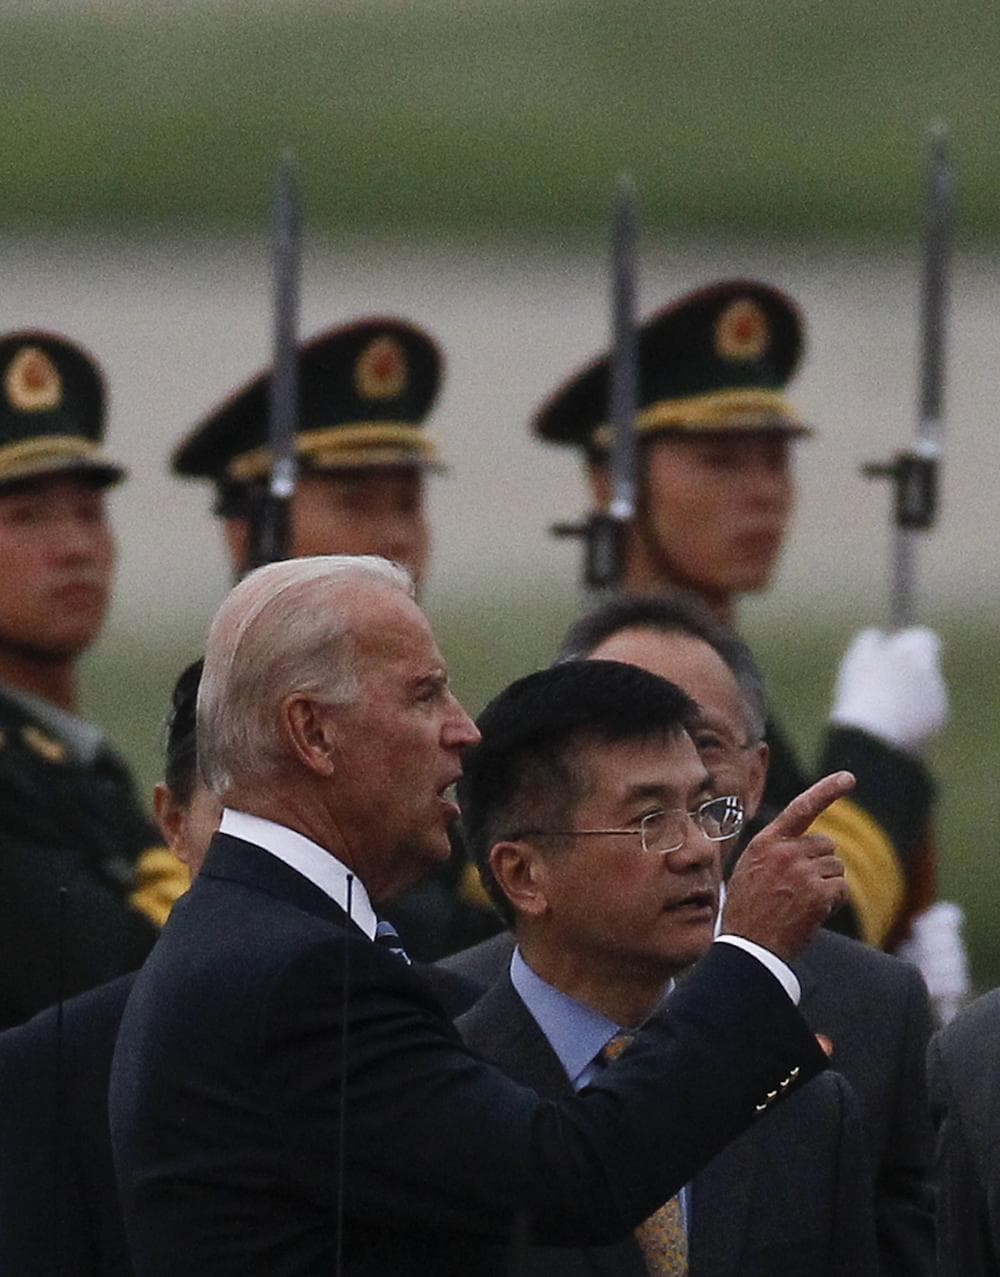 U.S. Vice President Joseph Biden, left, talks with U.S. Ambassador to China Gary Locke, right, after Biden's arrival  at the Capital International Airport in Beijing, China, Wednesday. (AP)